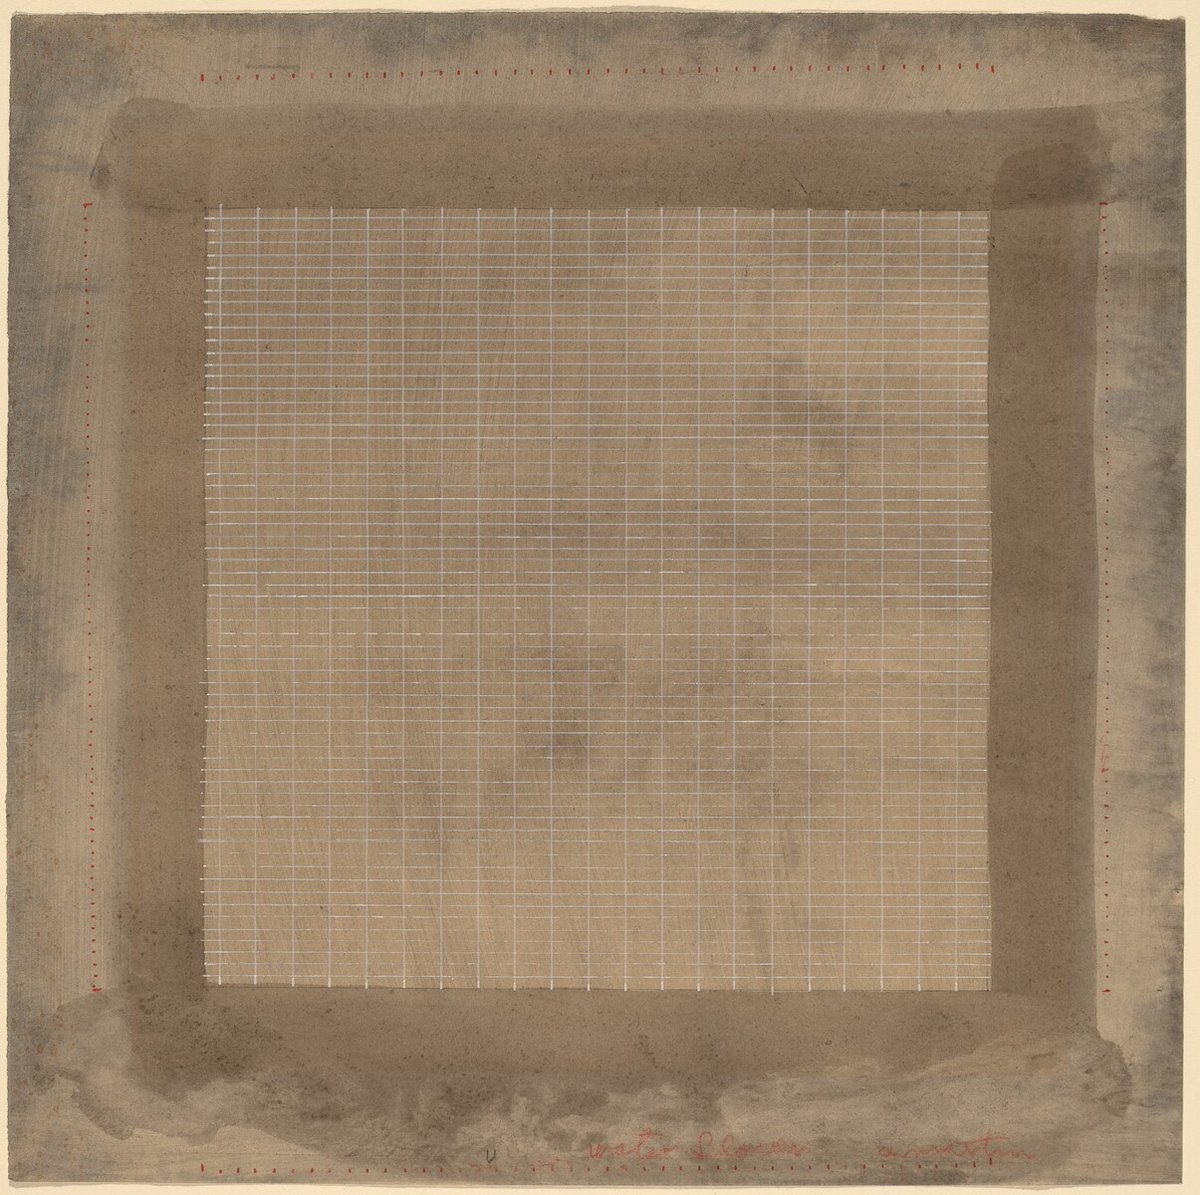 This work, “Water Flower,” (1963) is also in the Gallery’s collection. Eva Hesse apparently saw Agnes Martin’s art and took inspiration from the lines and grids seen in much of Martin’s art.